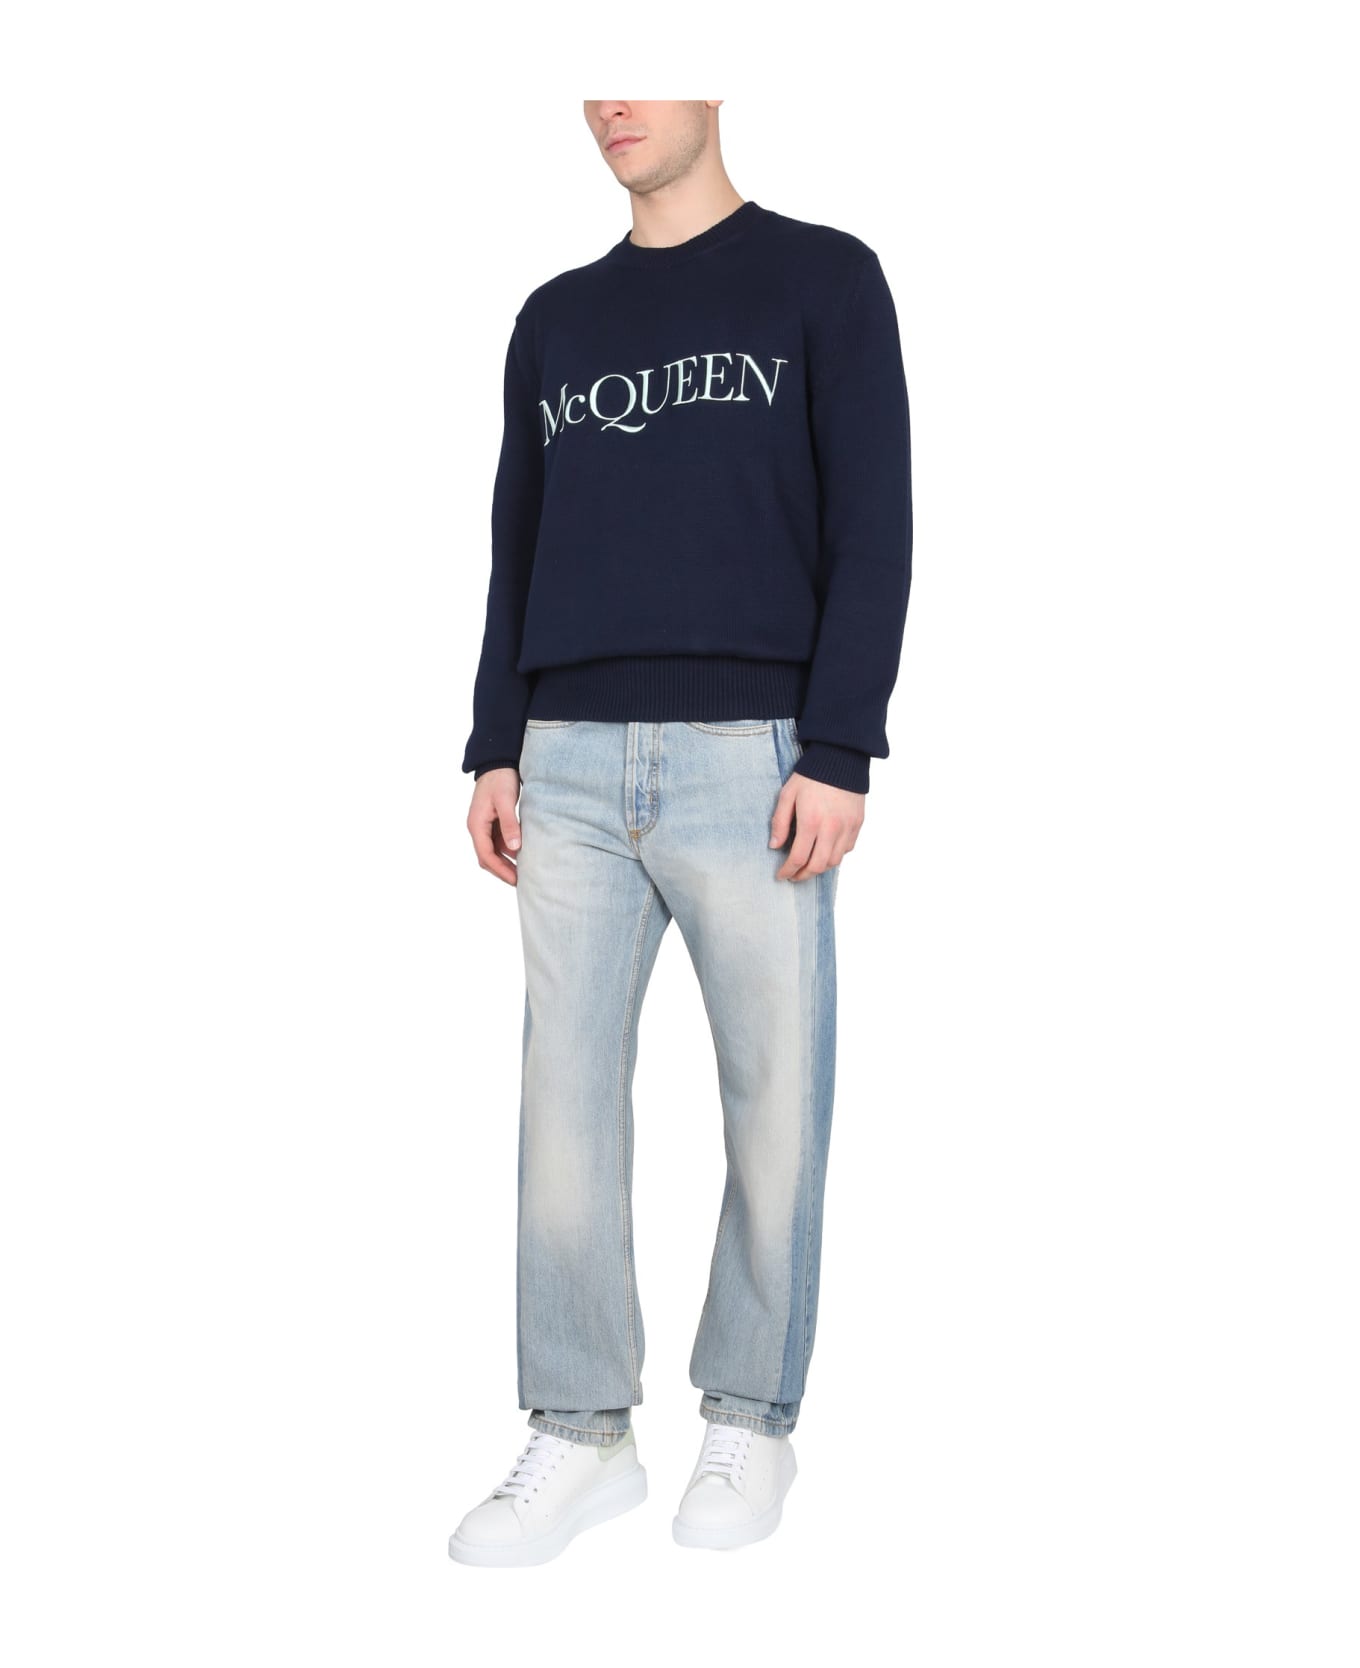 Alexander McQueen Worker Jeans With Patches - BLU デニム